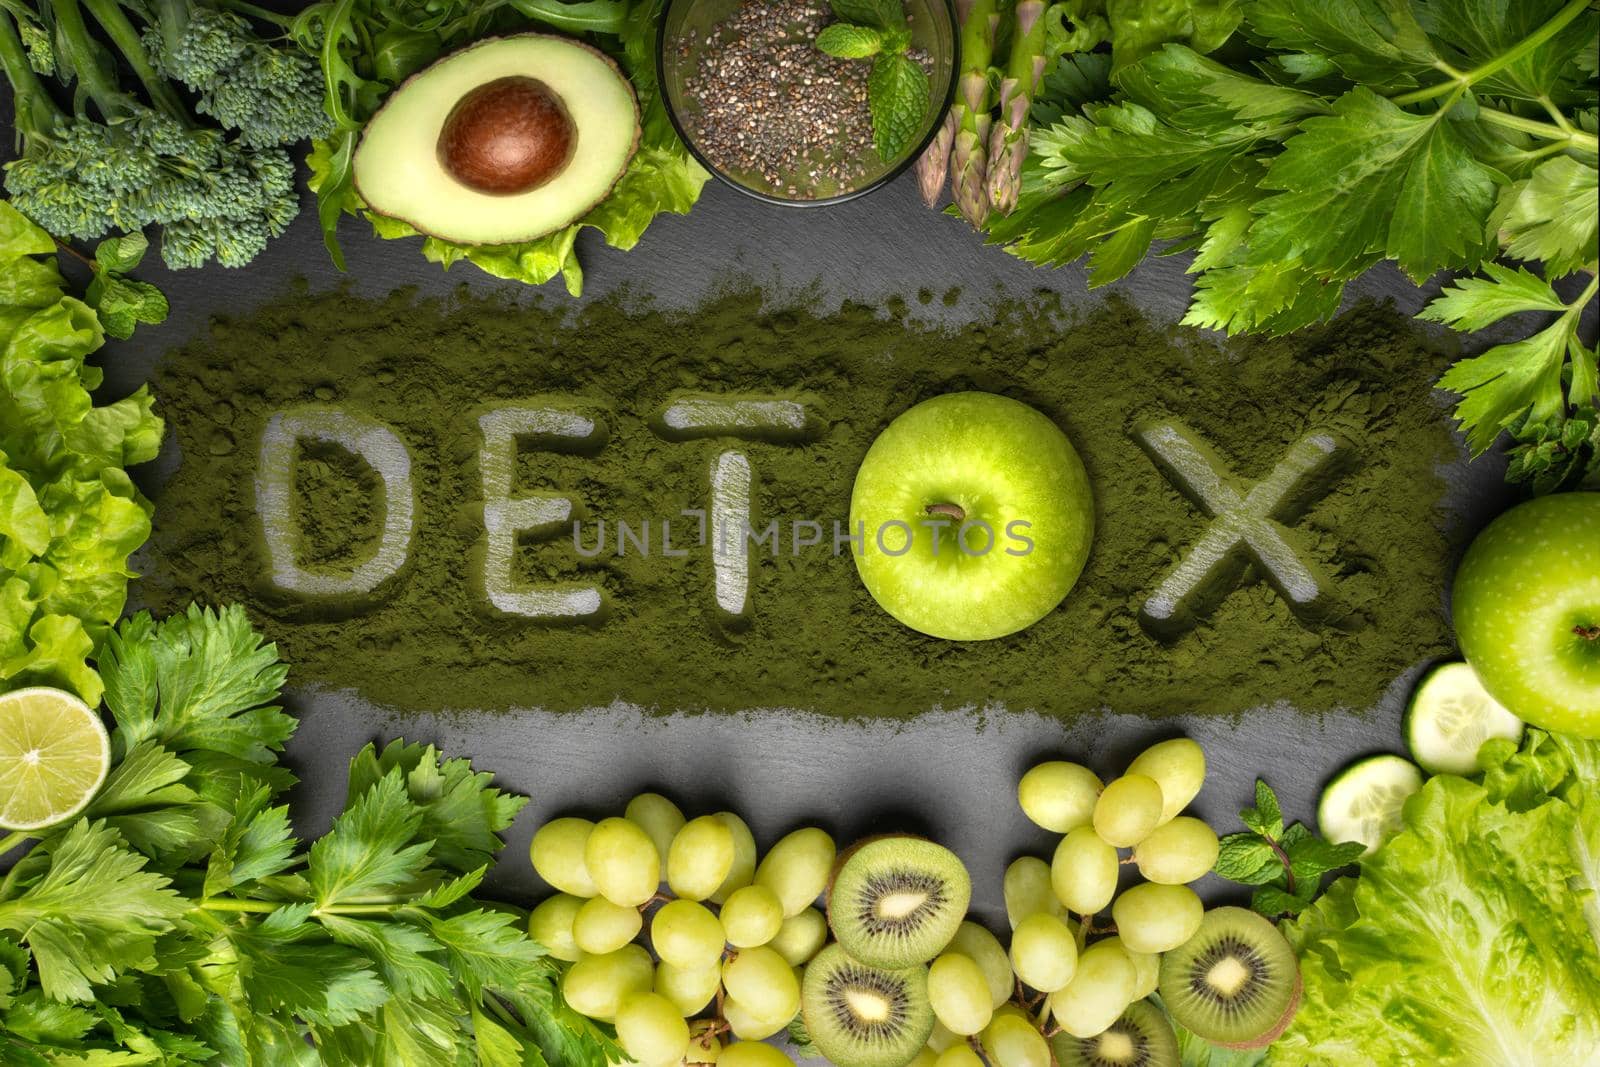 Detox diet, clean and healthy eating. Top view of fresh vegetables, fruits and chlorella with detox text by DariaKulkova